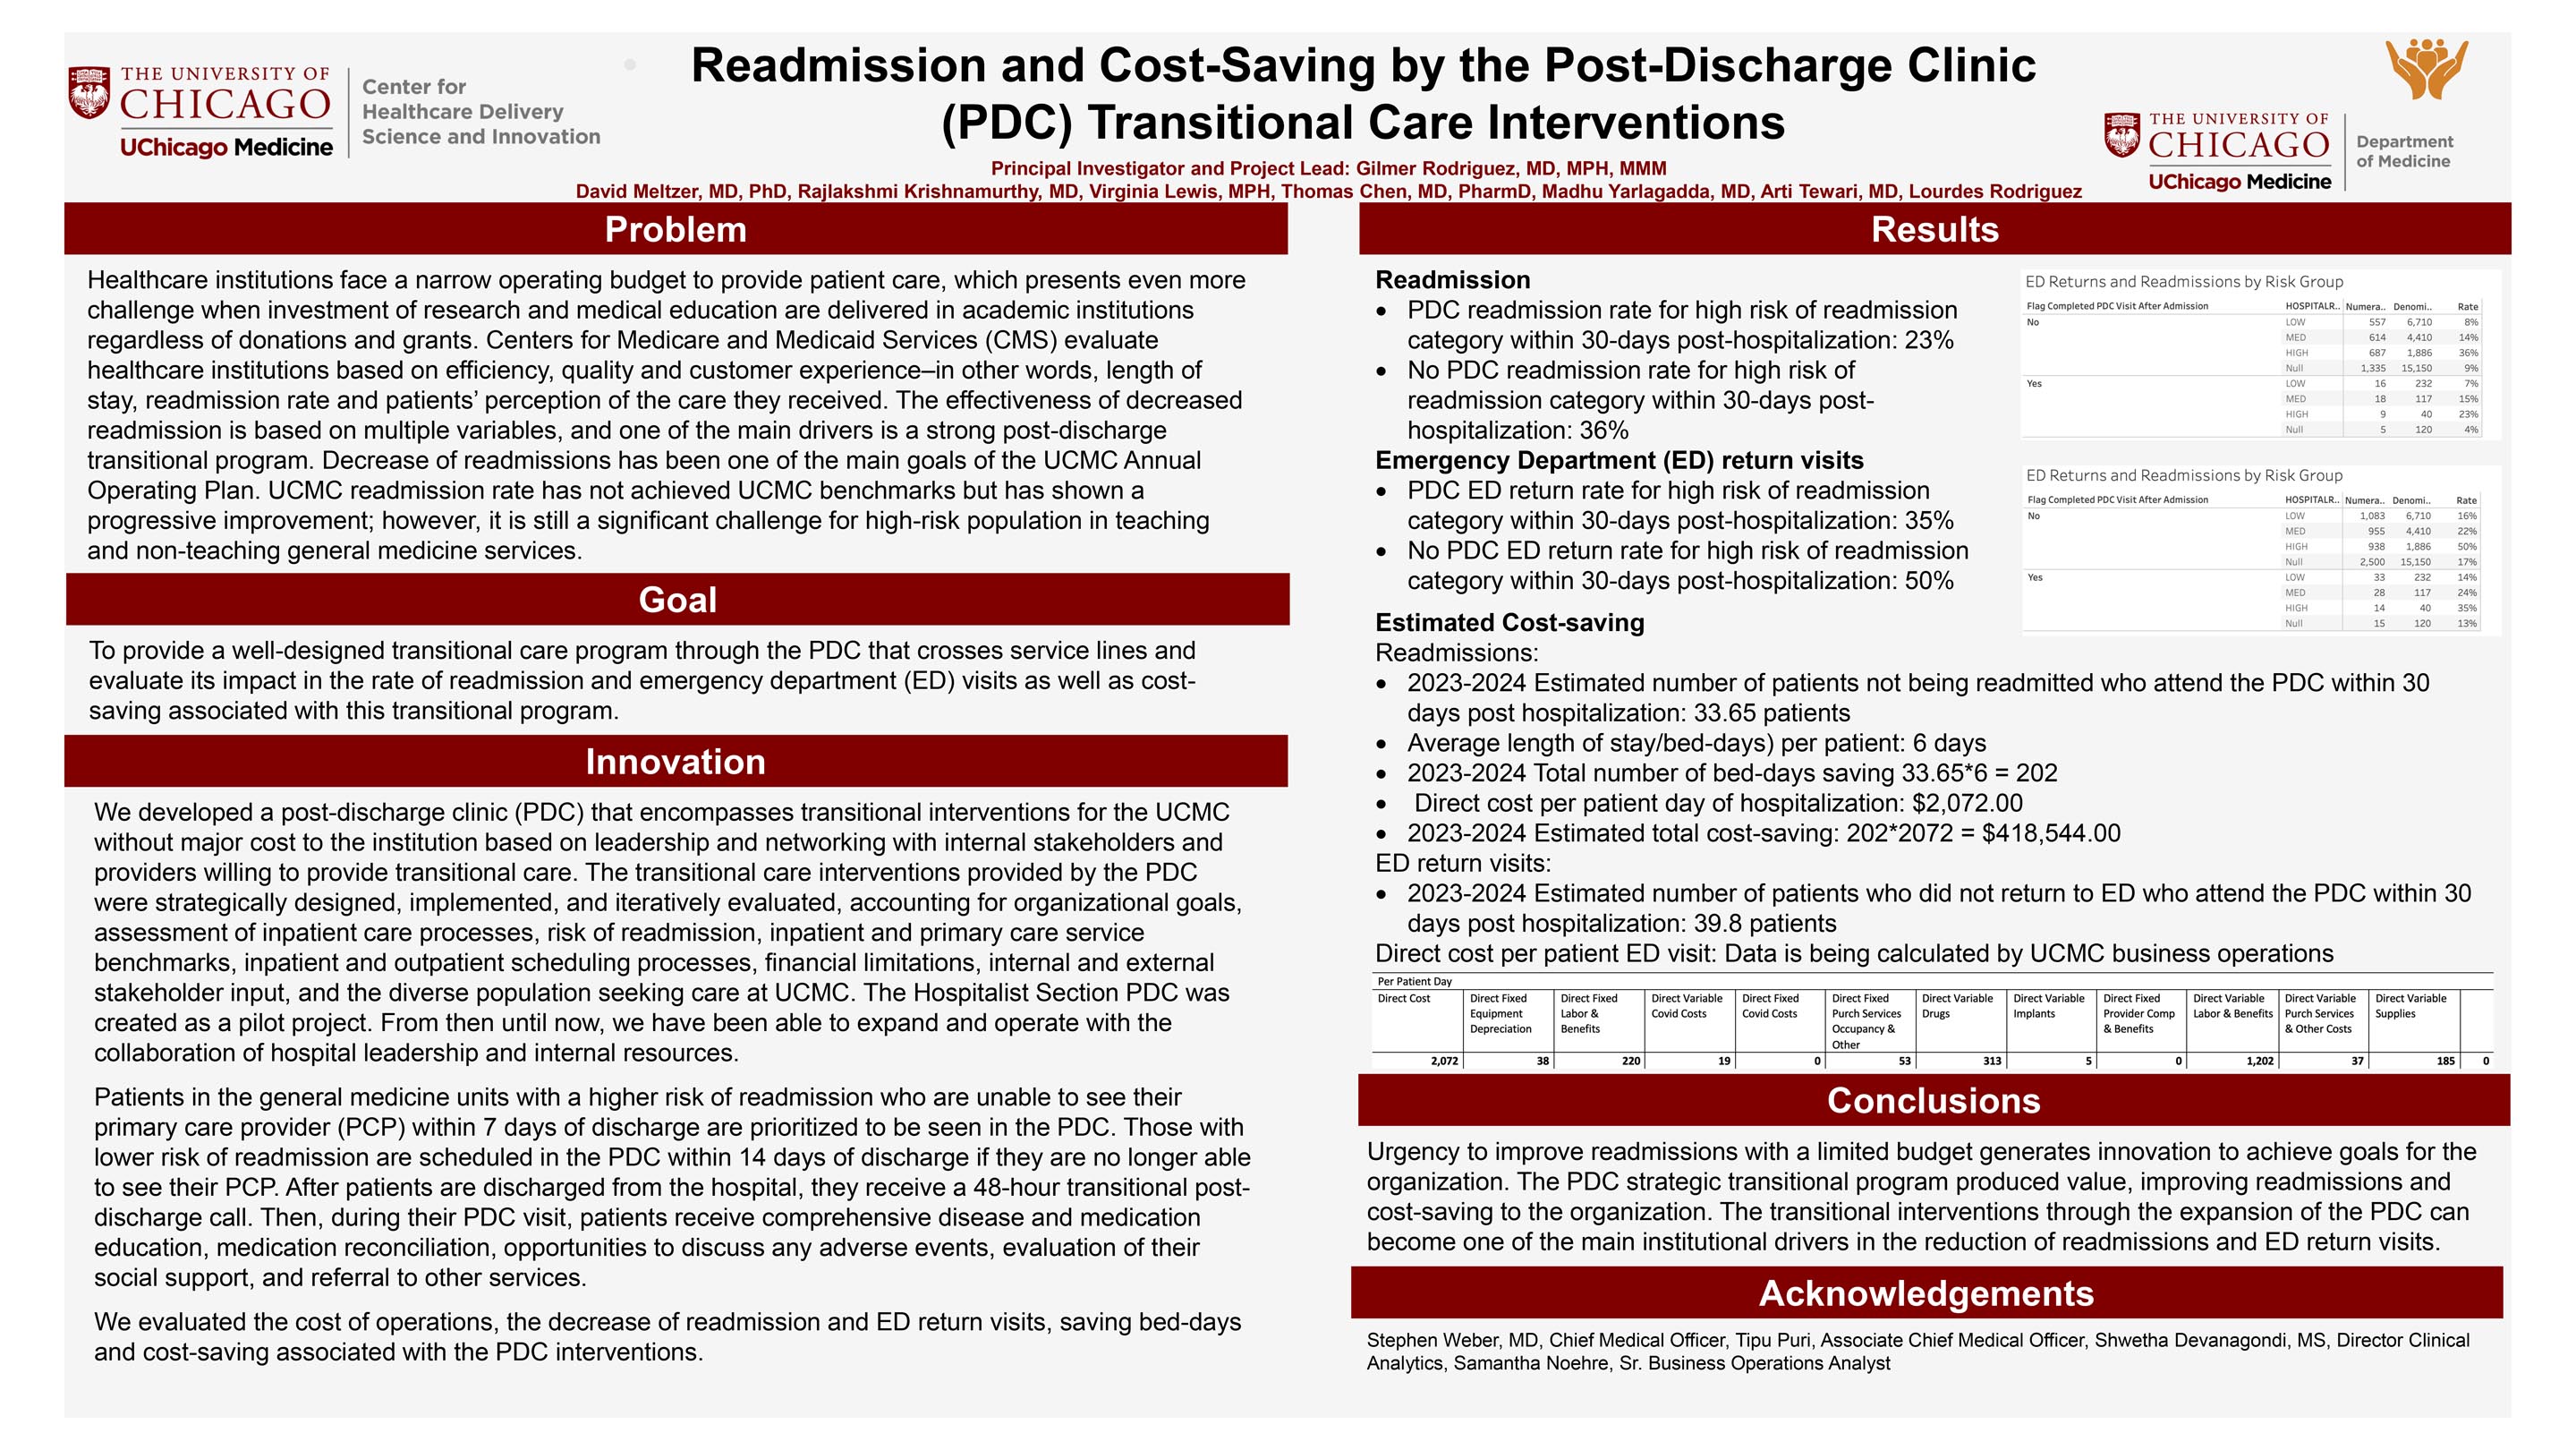 RODRIGUEZ_Readmission and Cost-Saving by the Post-Discharge Clinic Transitional Care Interventions